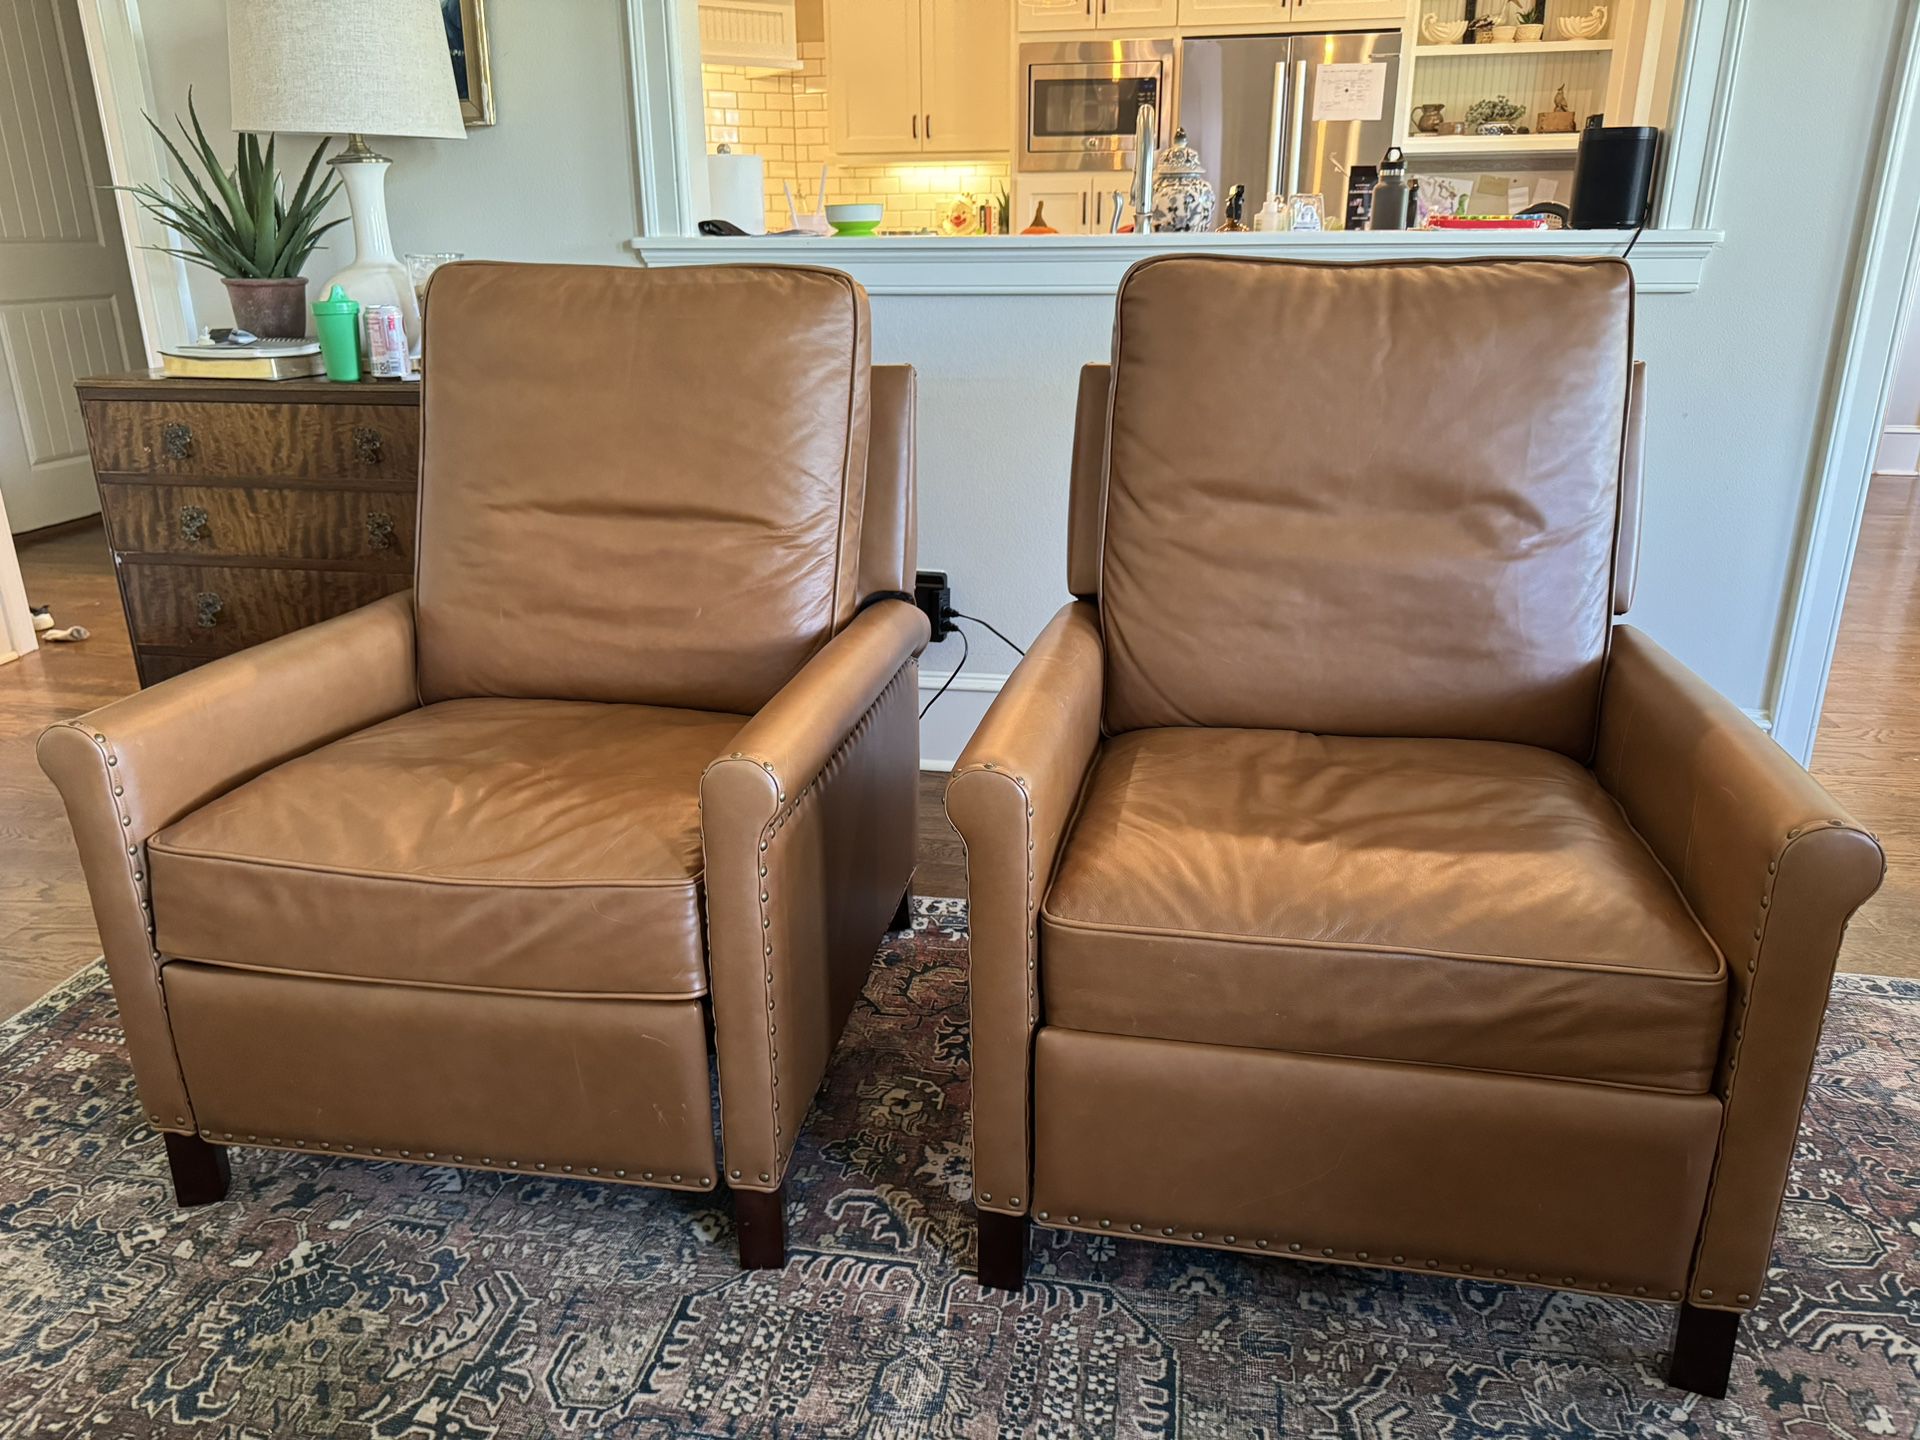 BRAND NEW Pottery Barn Recliners